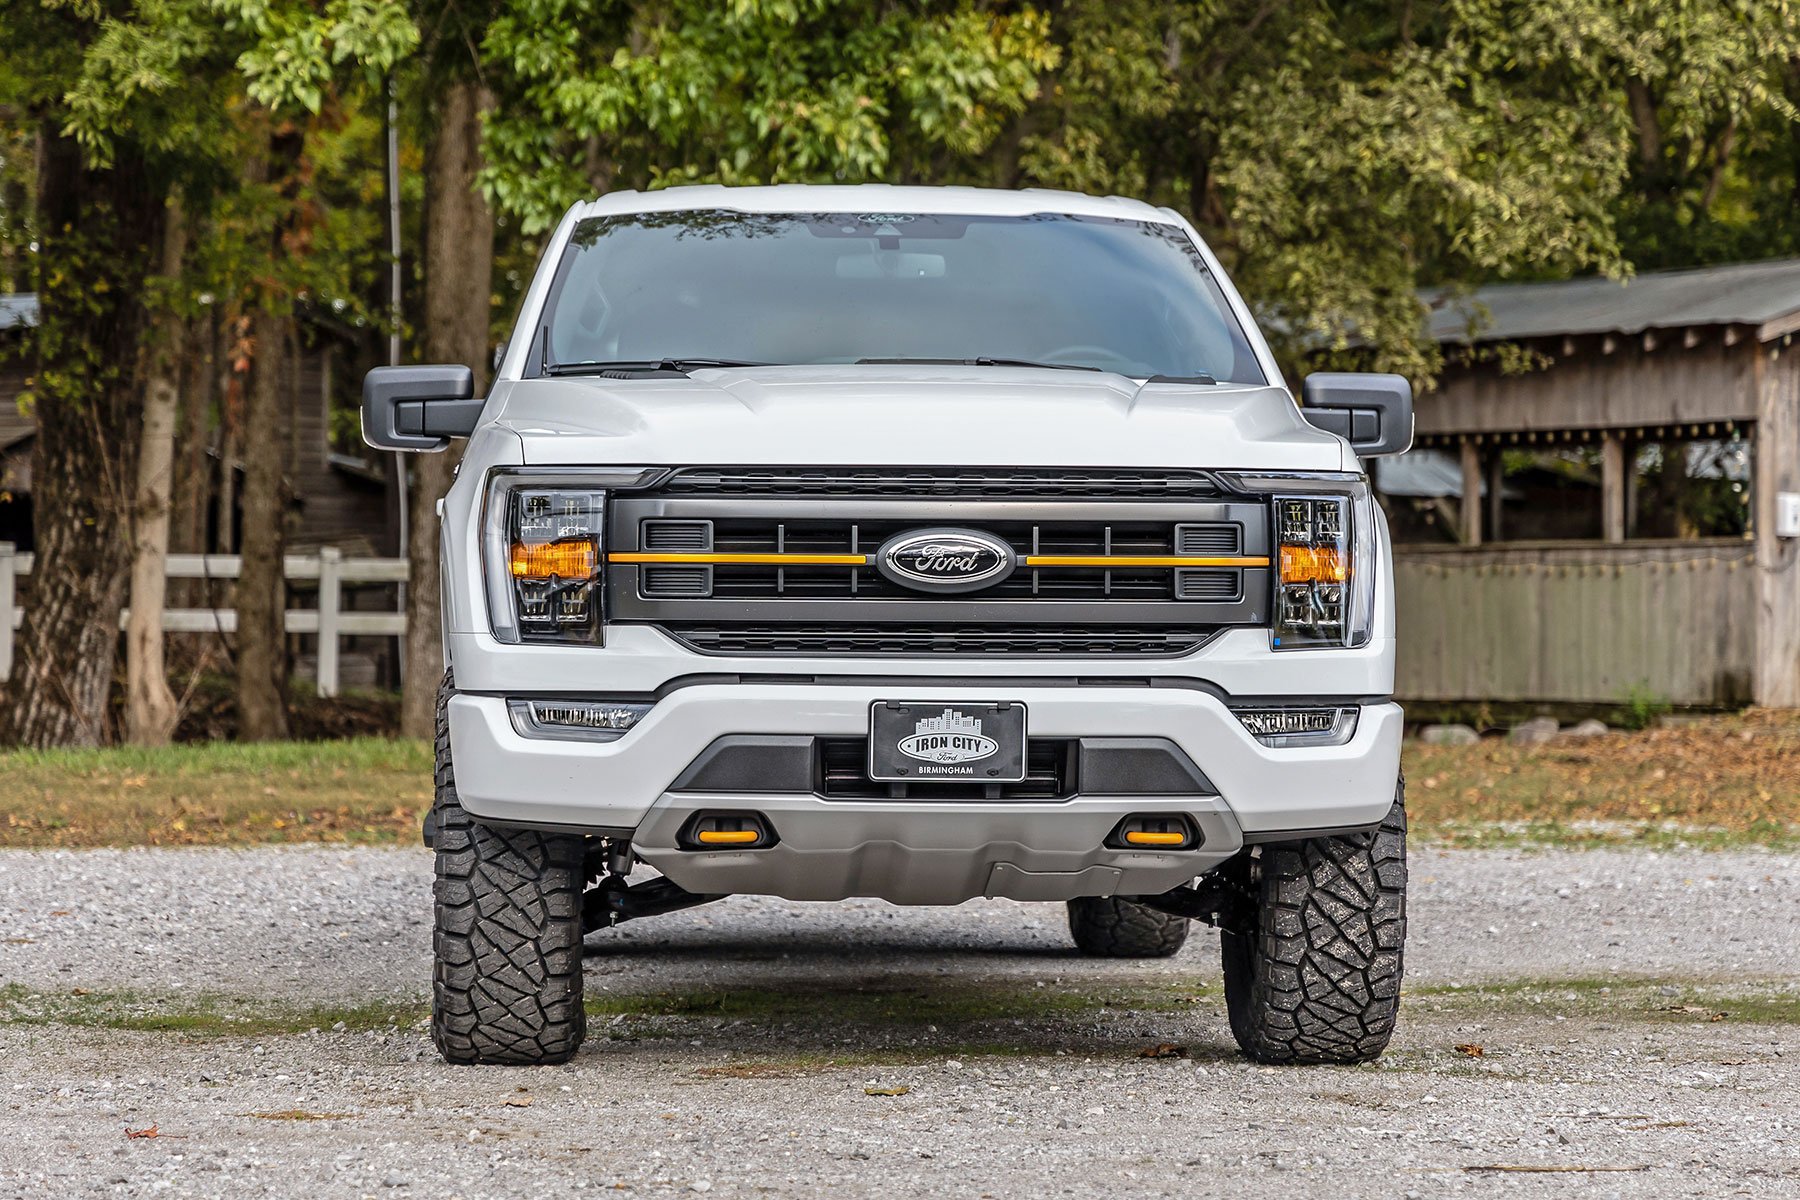 Front Seat Riser 1.5 Spacer Lift Kit for Chevy Silverado/ GMC